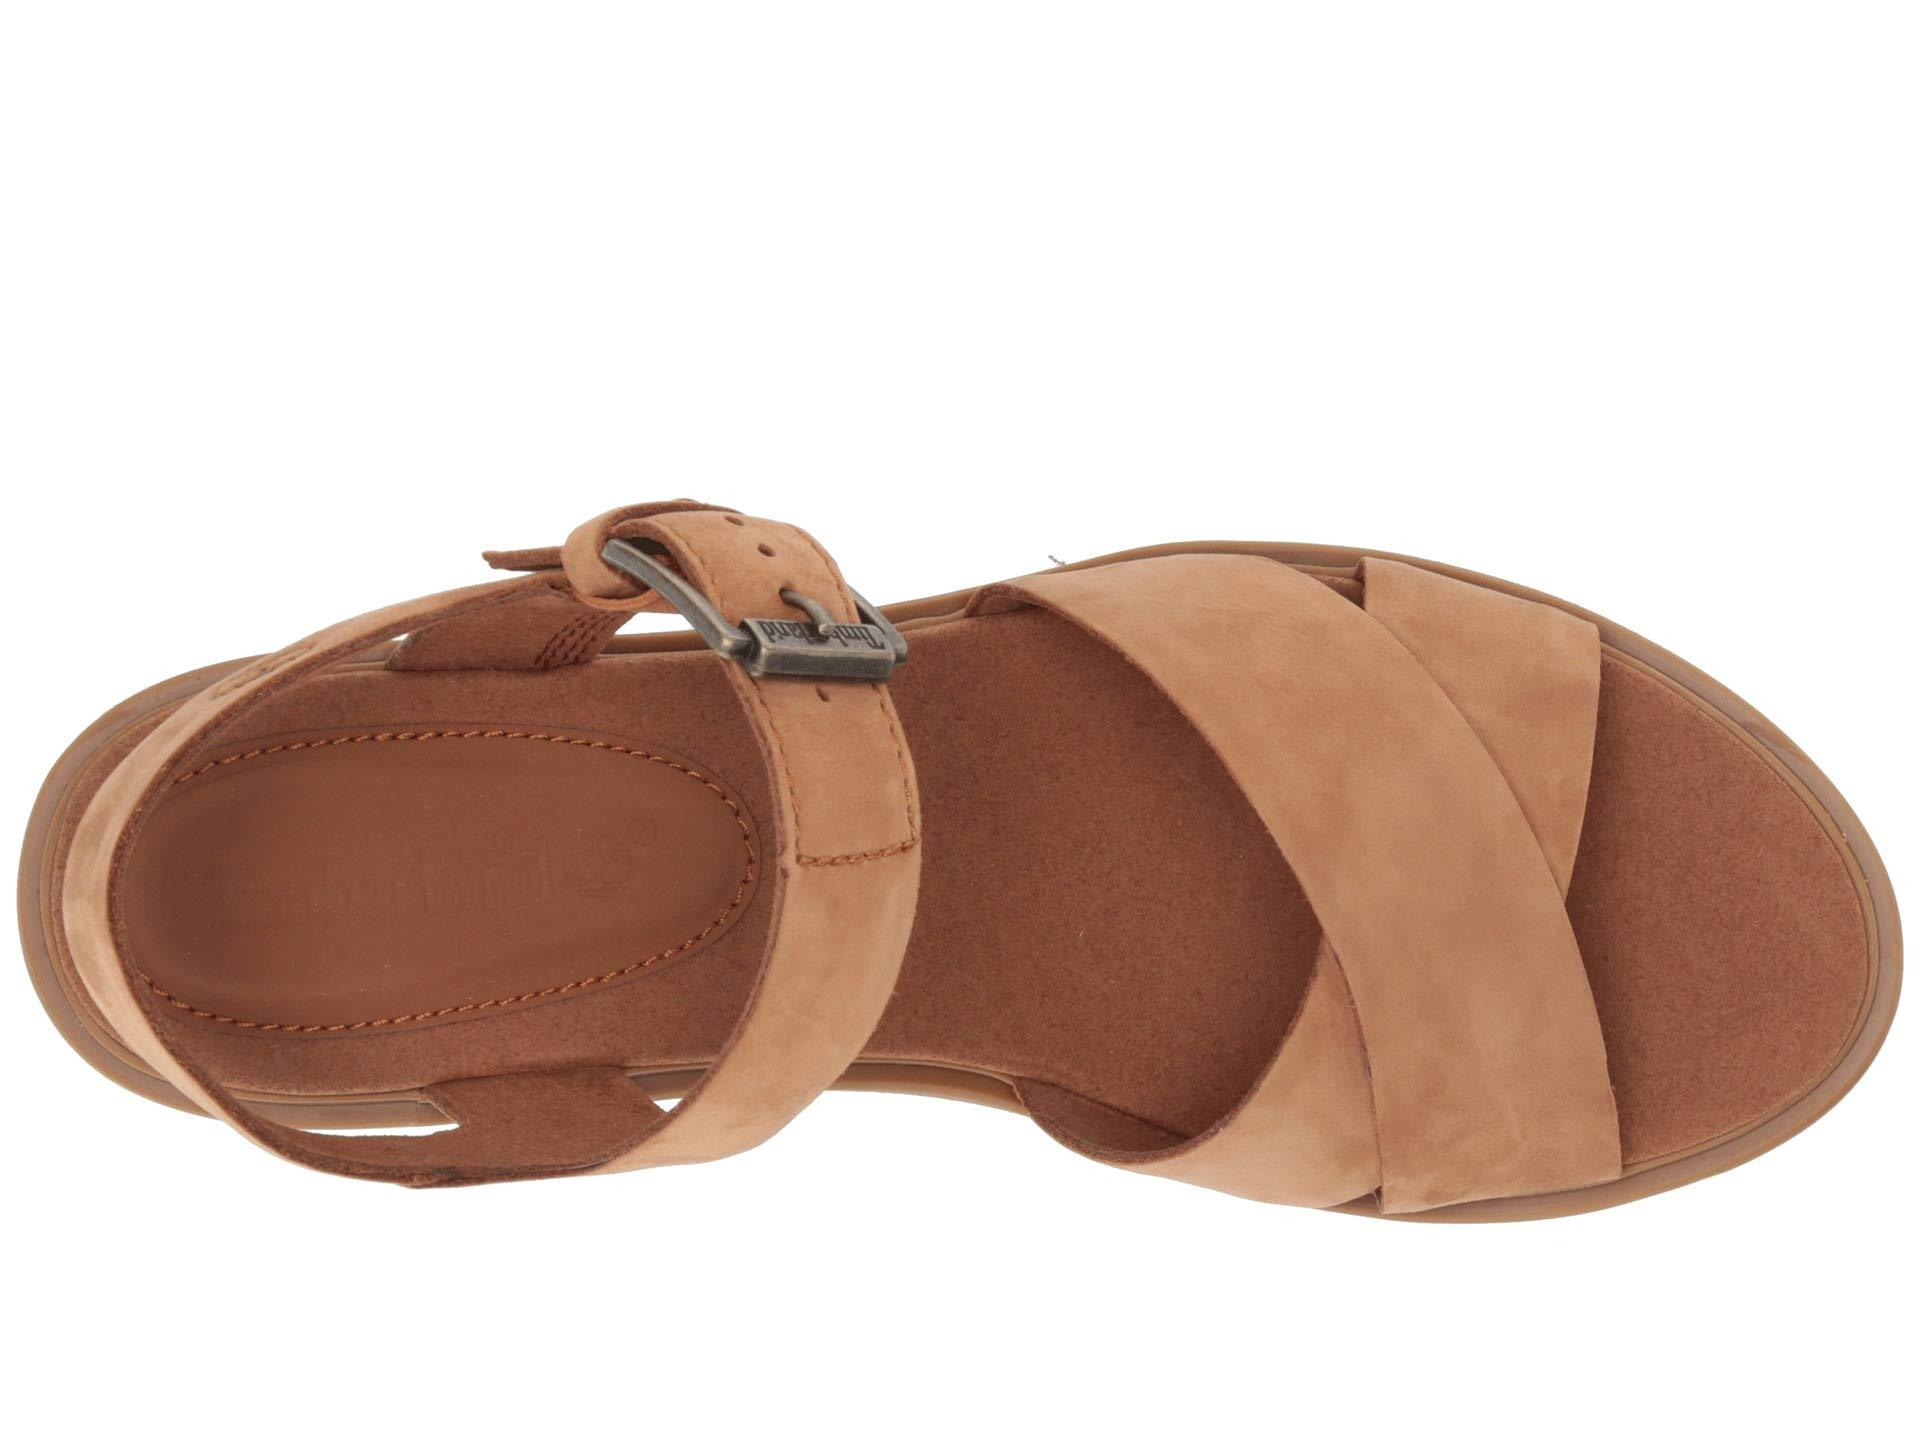 Timberland Violet Marsh Cross Band Sandal in Brown | Lyst